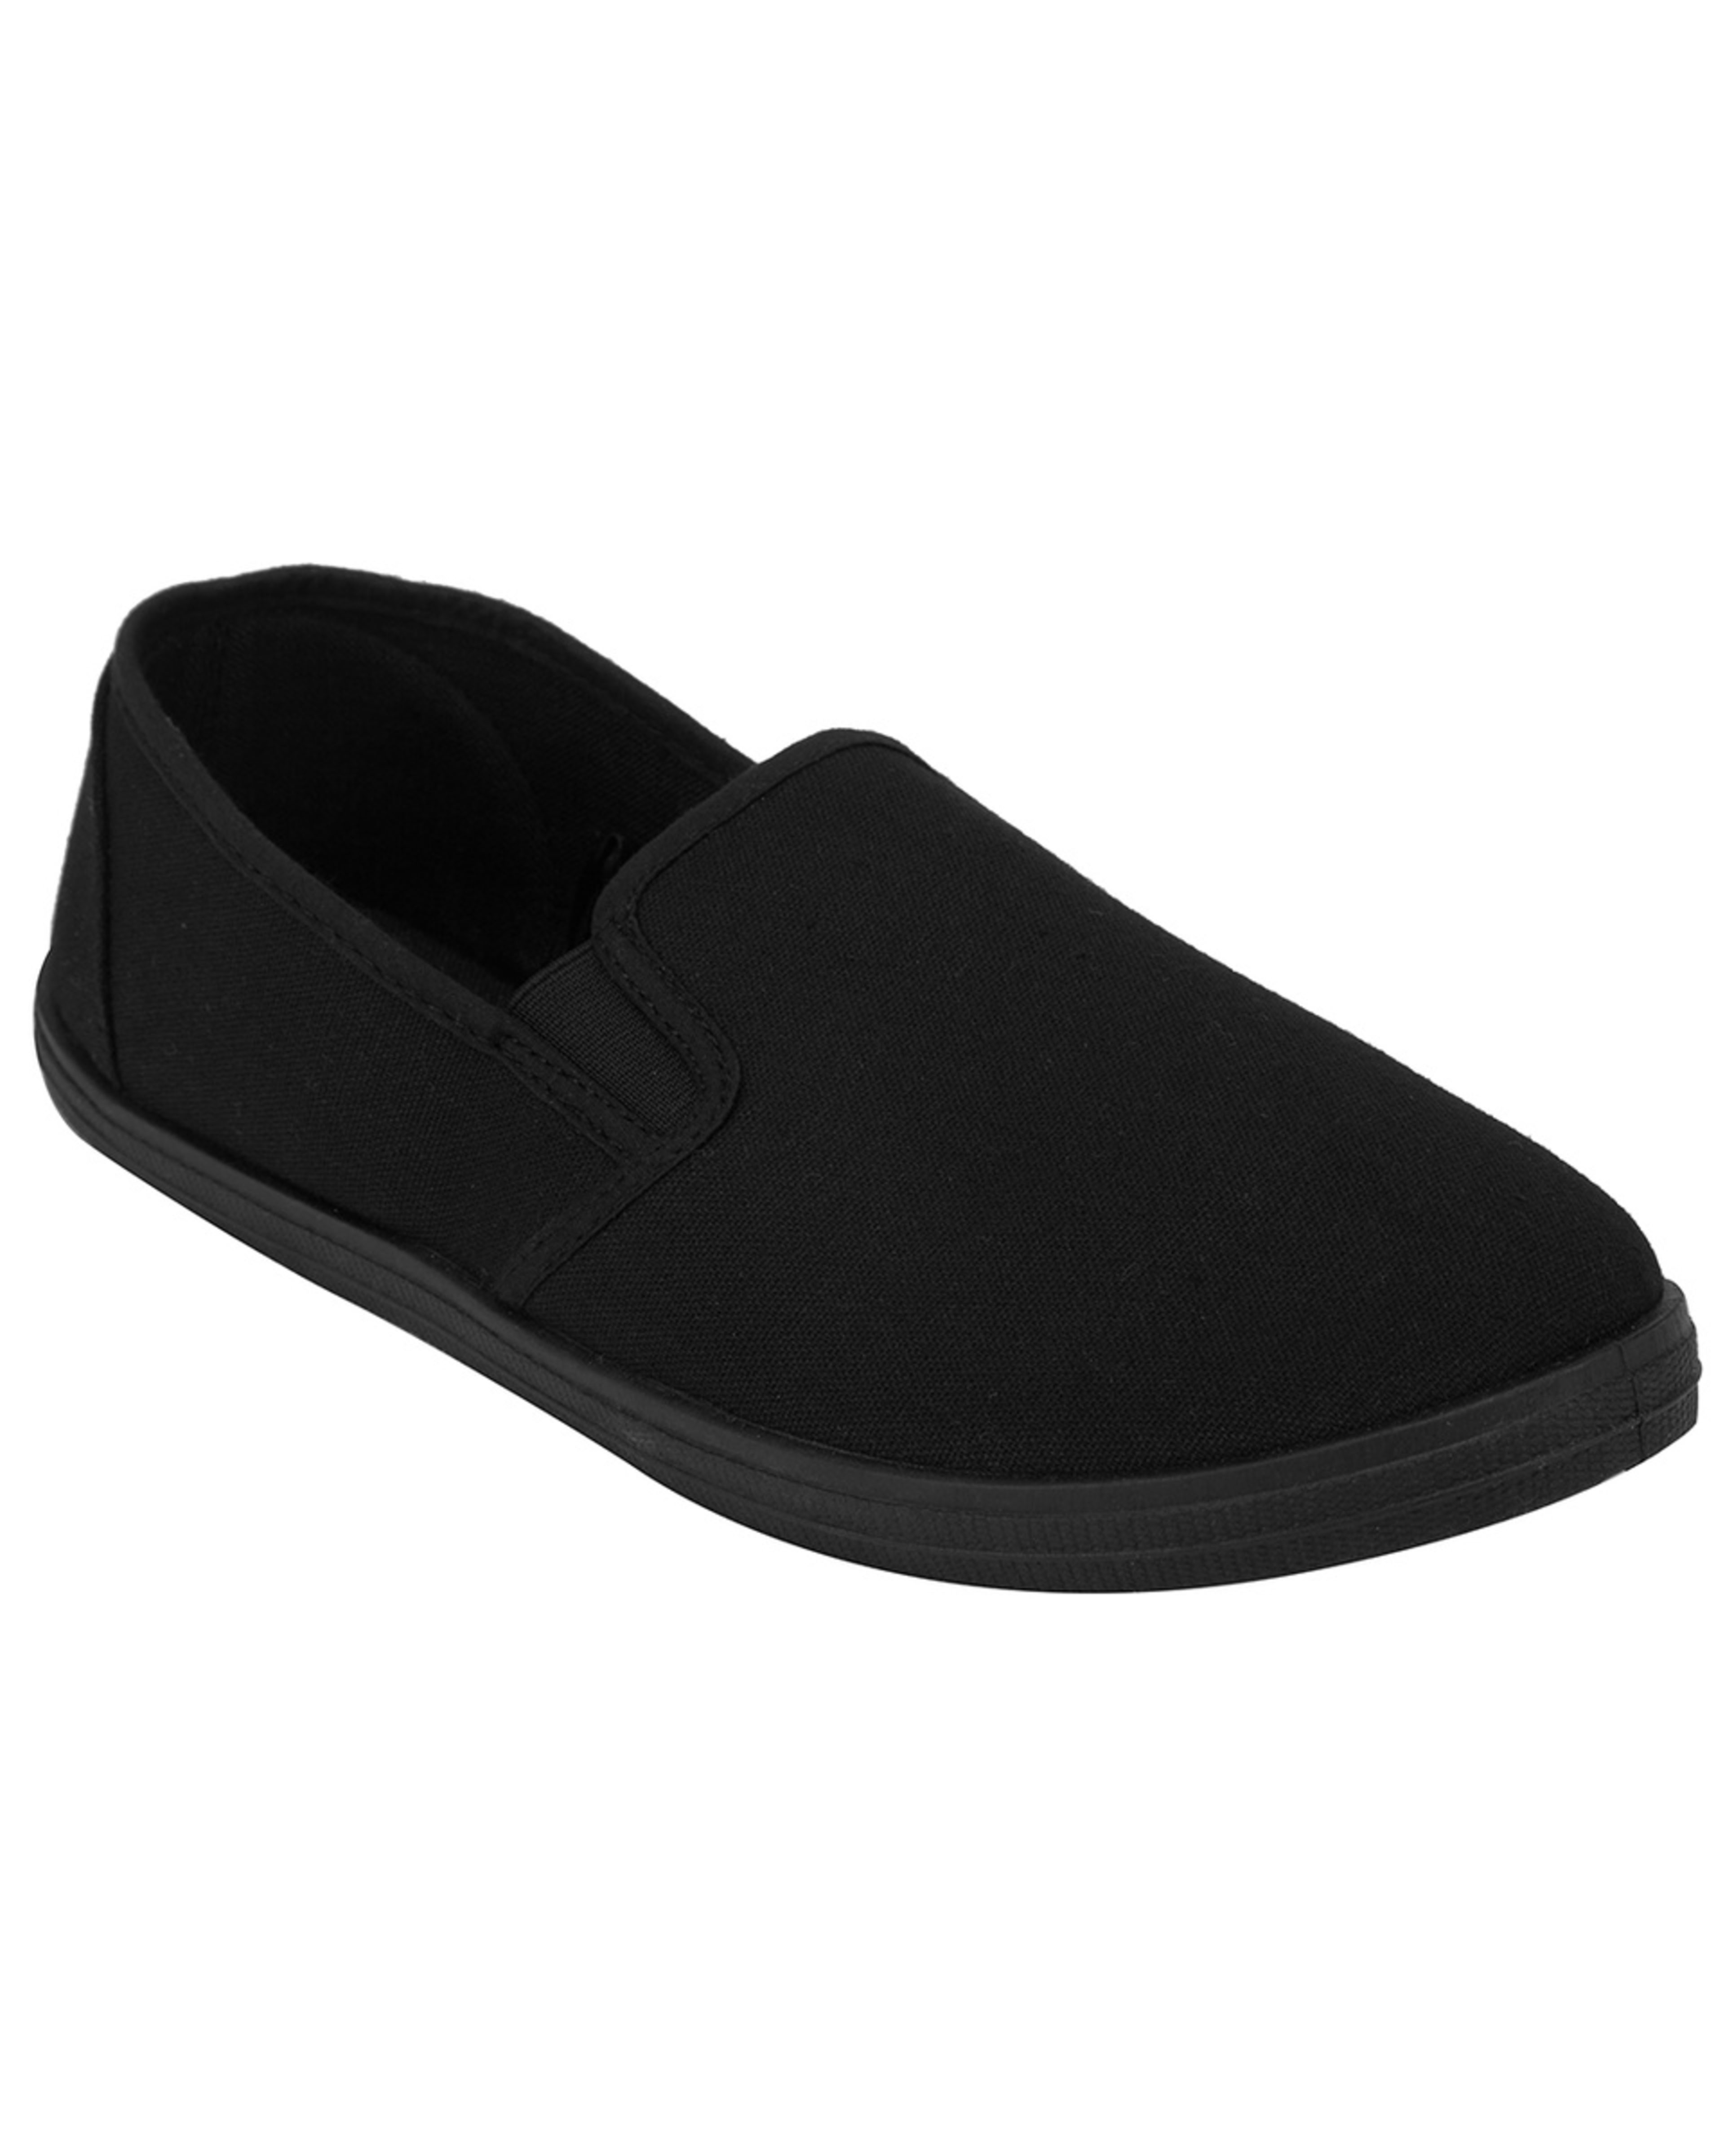 Everyday Canvas Slip On Shoes - Kmart NZ